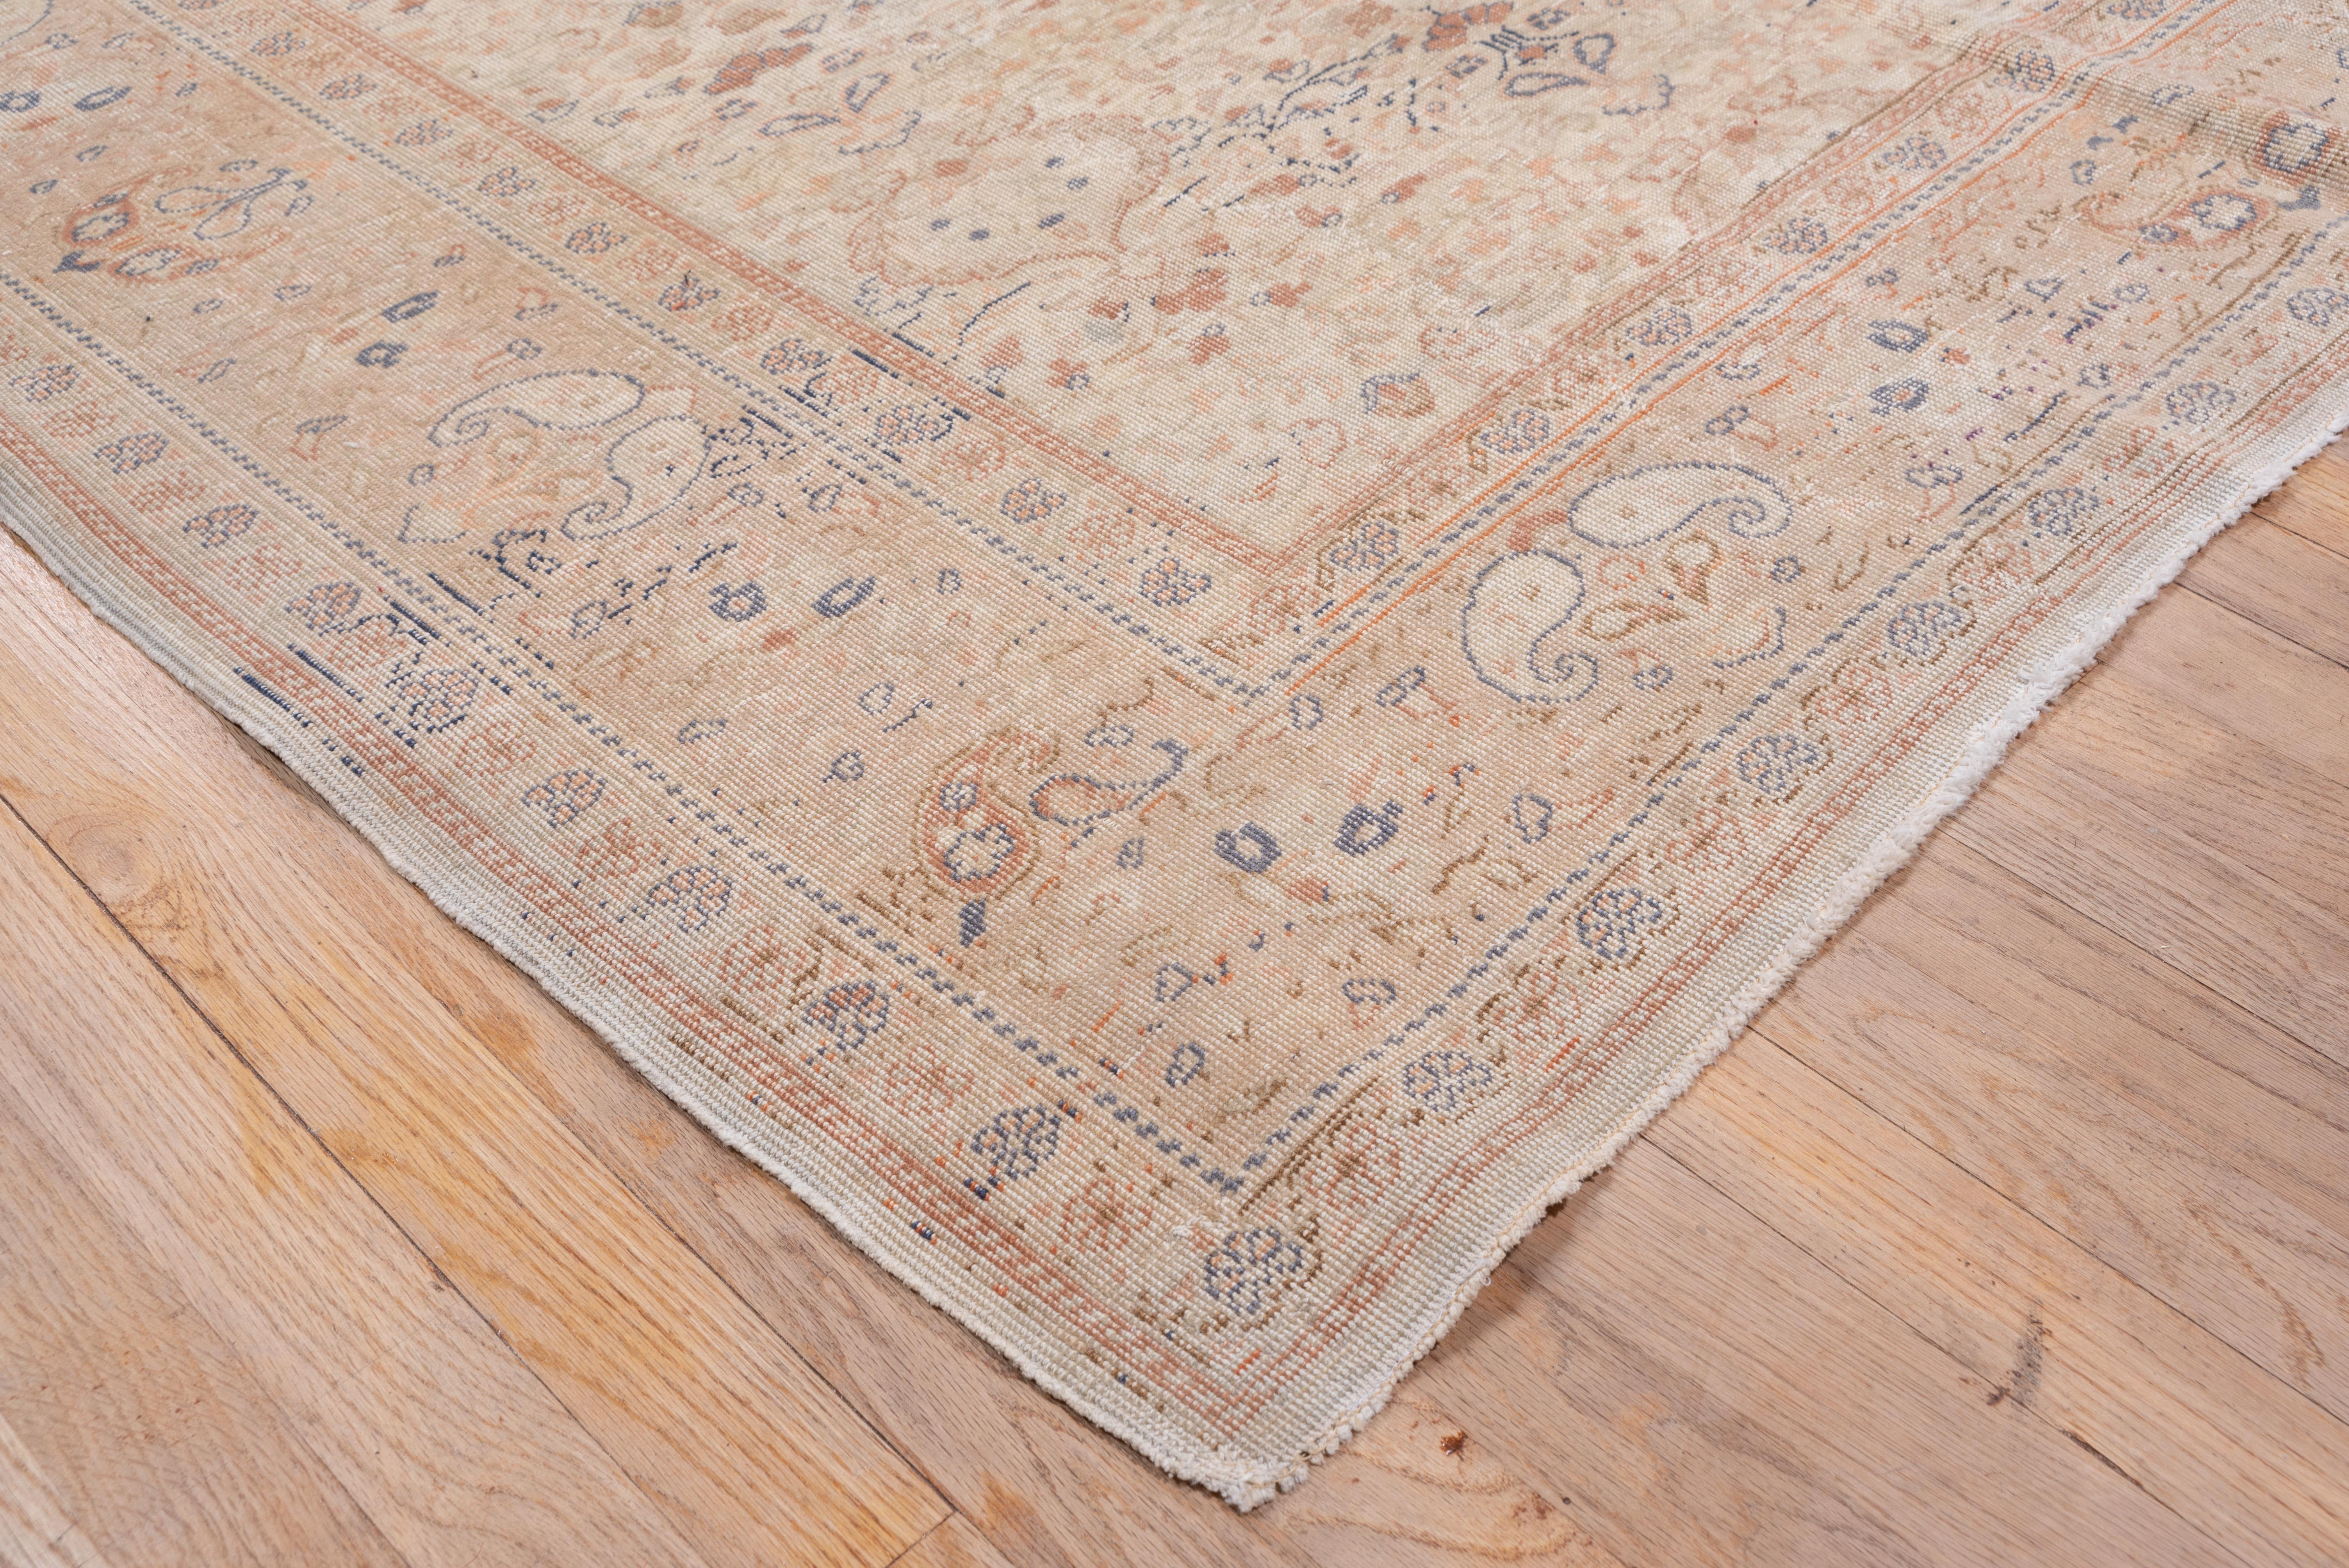 The ecru ground of this East Anatolian, medium weave town carpet shows a wiry flower and leafy spray repeating design, with acanthus defined open reserves in three columns. Blue, peach, brown accents. Straw paired boteh and palmette border.